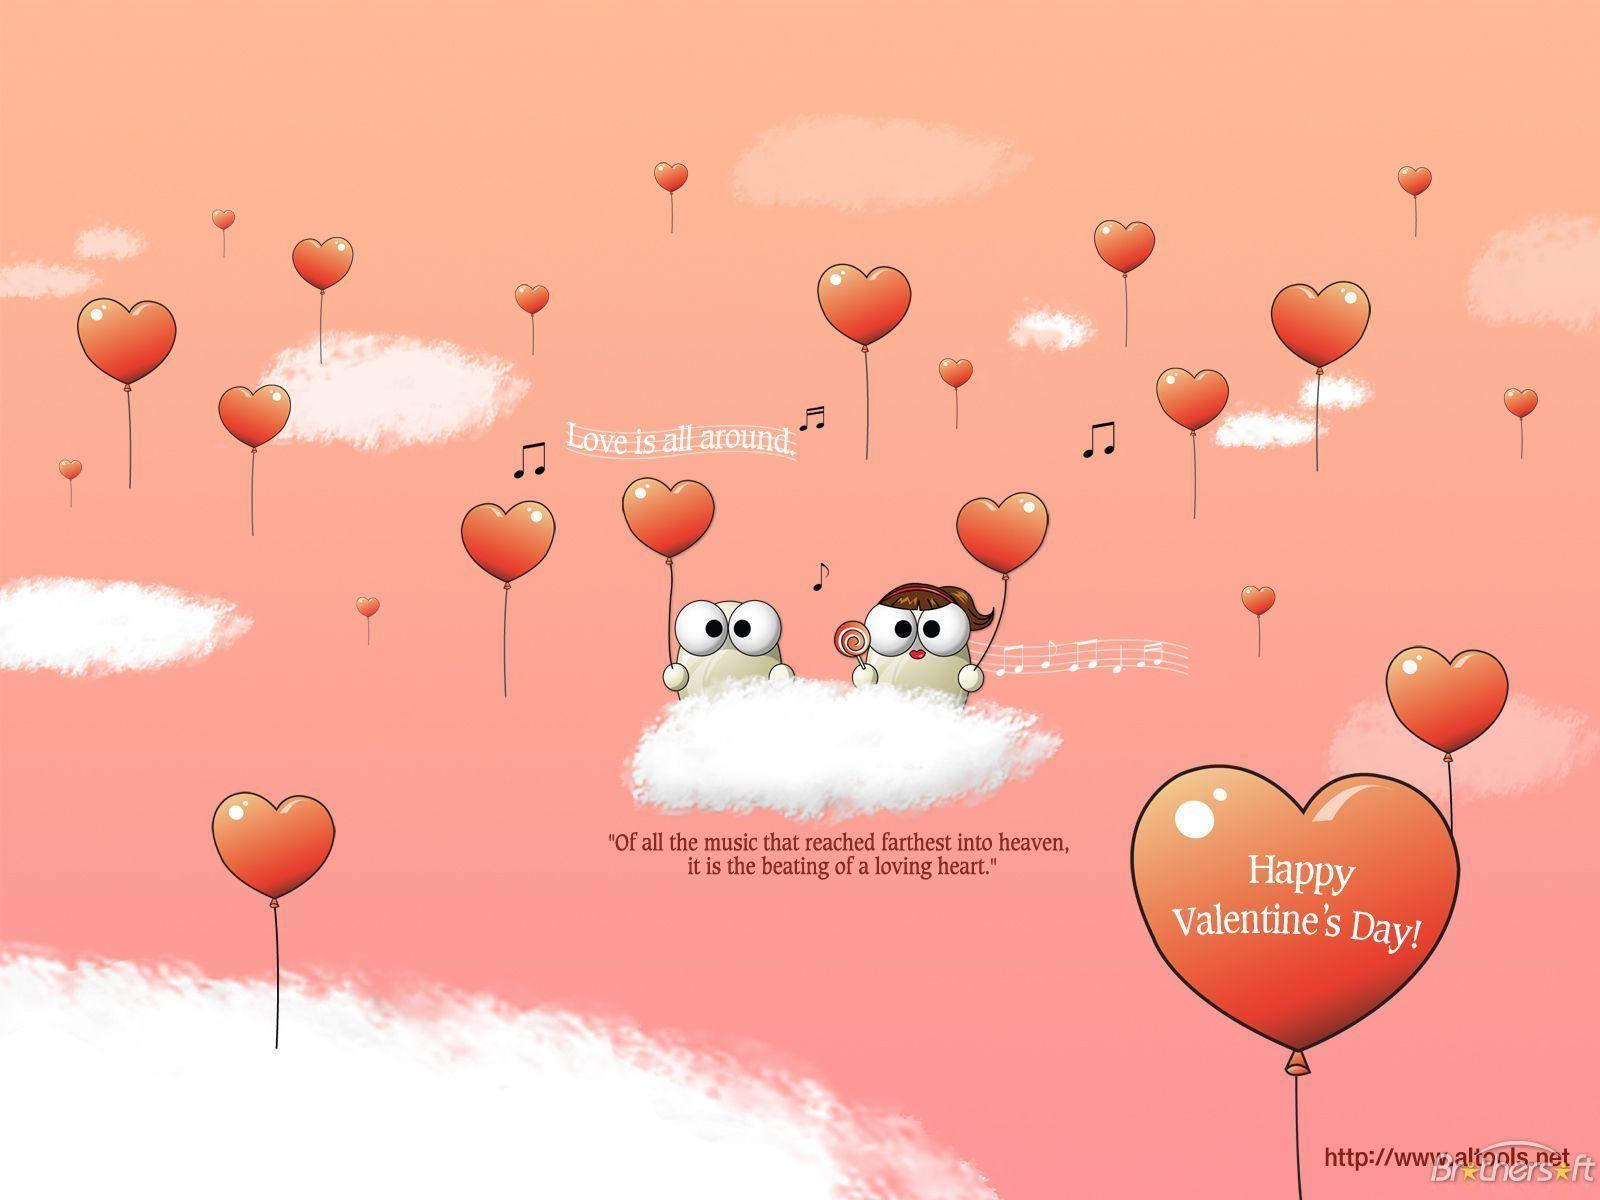 Loving and Heart Shaped Wallpaper on Valentine Day